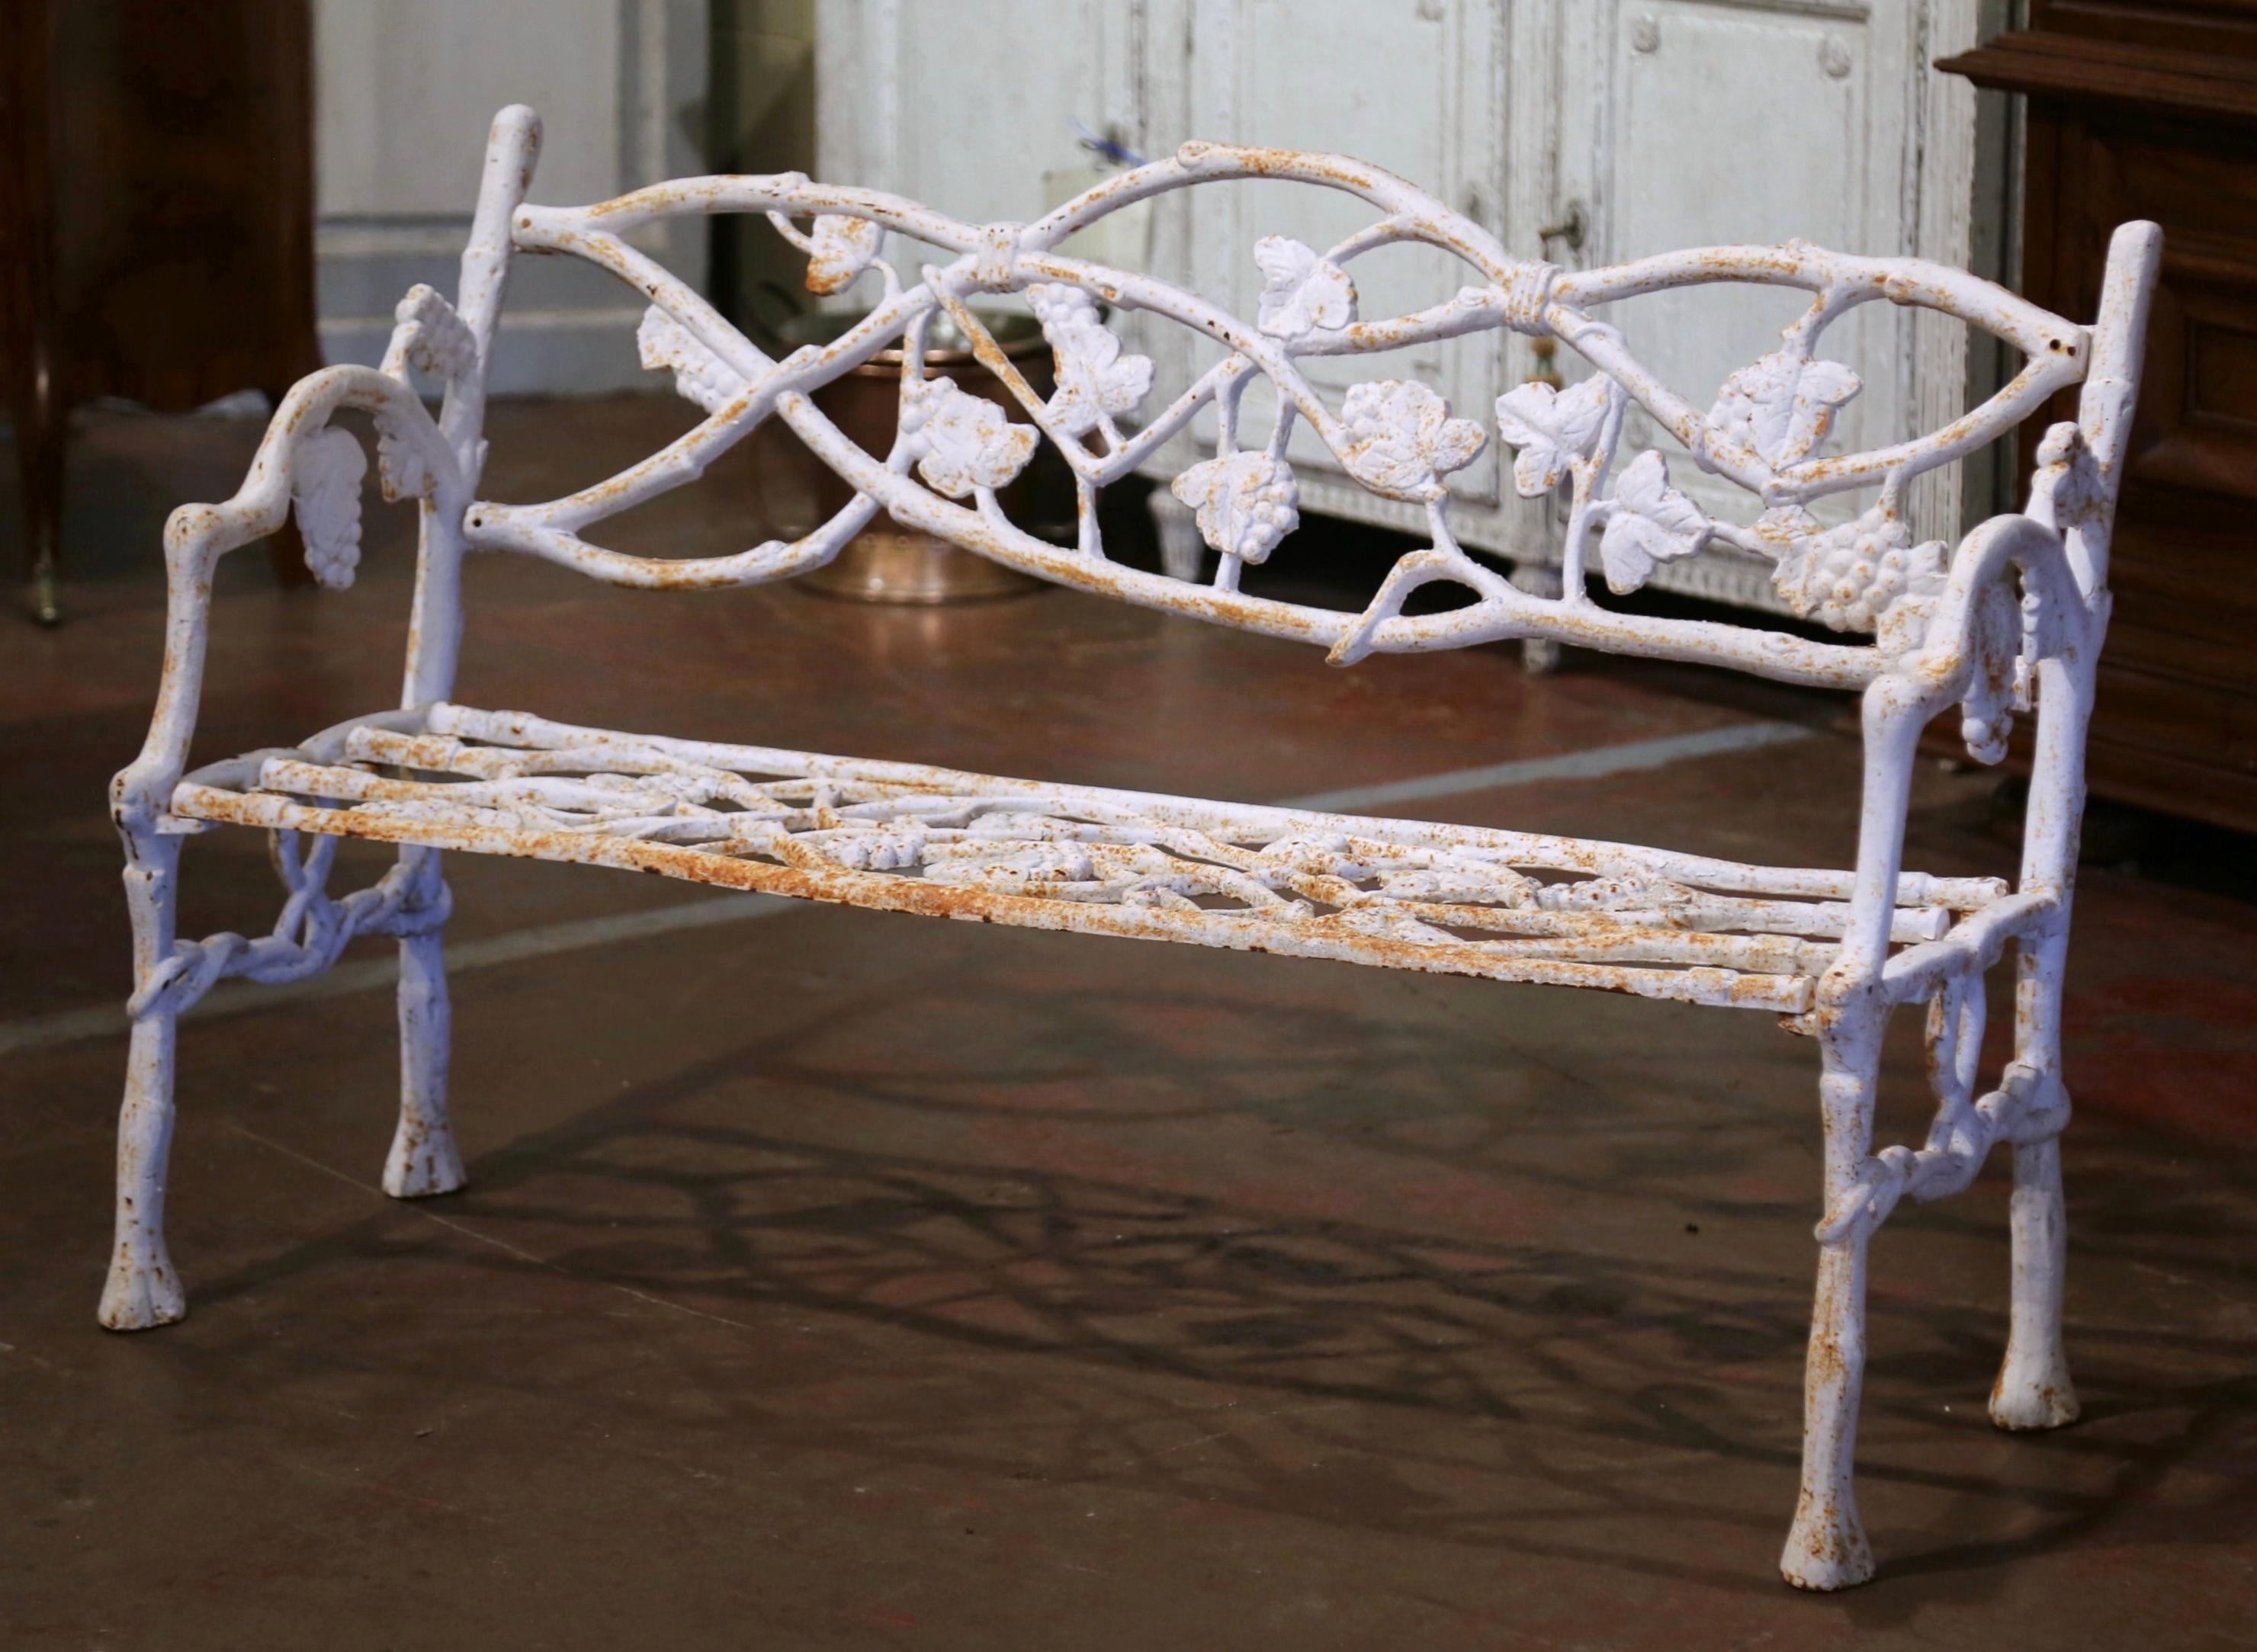 Hand-Crafted Early 20th Century French White Painted Cast Iron Garden Bench with Vine Motifs